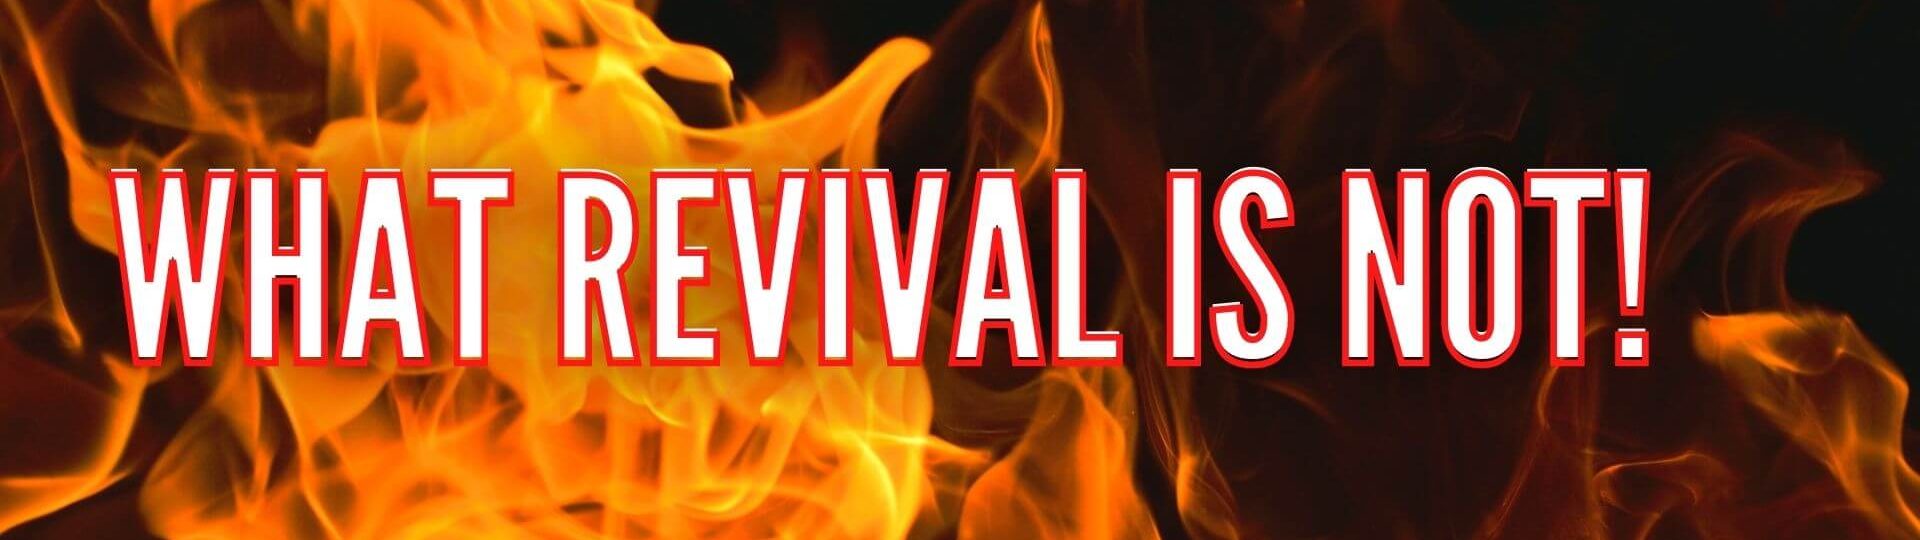 What revival is NOT!